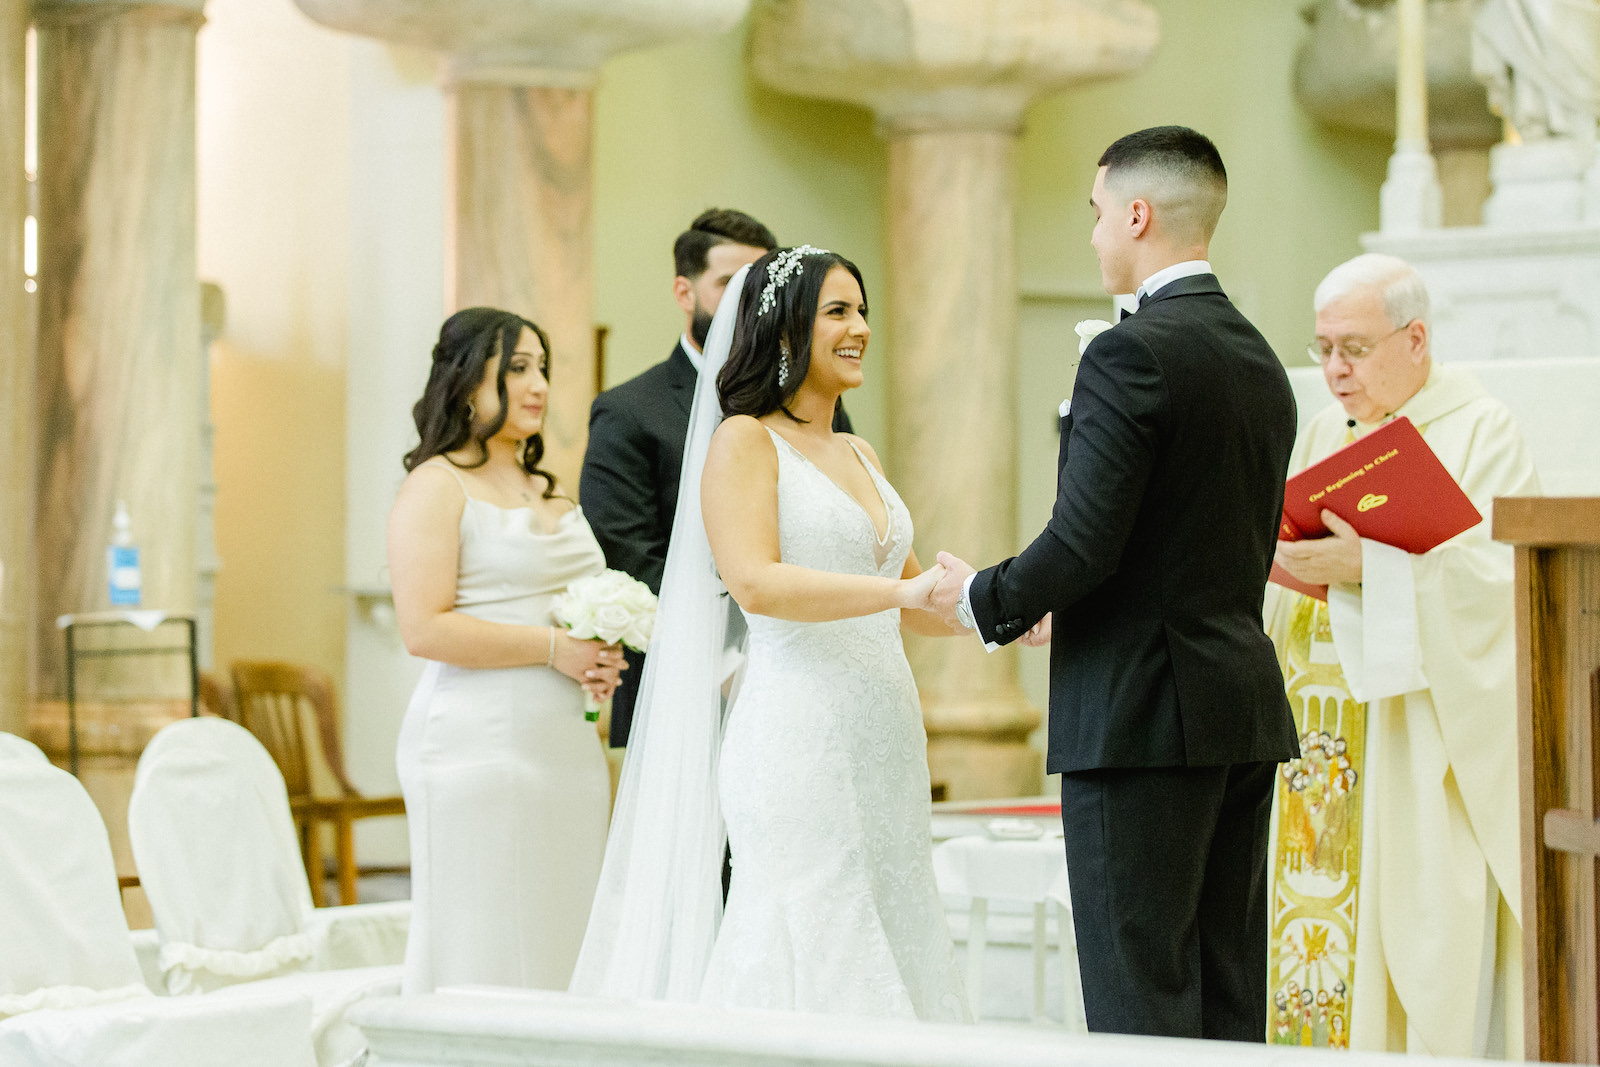 Romantic Bride and Groom Wedding Ceremony Vow Exchange During Traditional Church Wedding